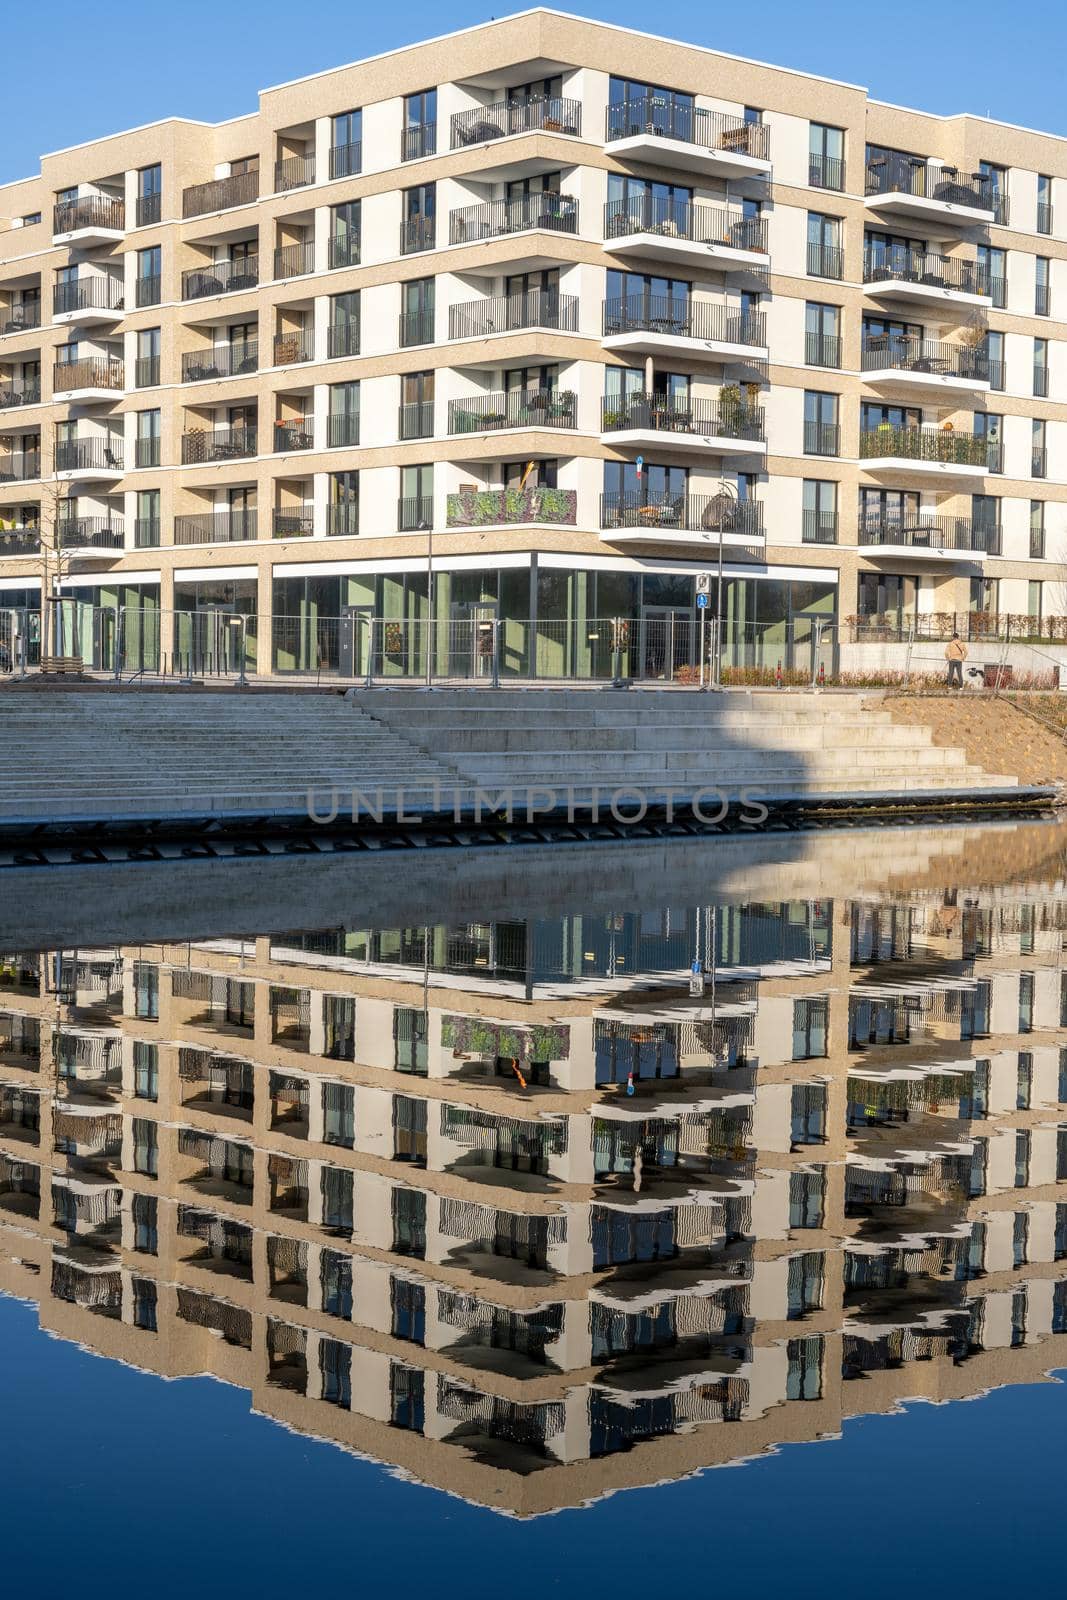 New apartment building in Berlin, Germany, reflecting in a small canal